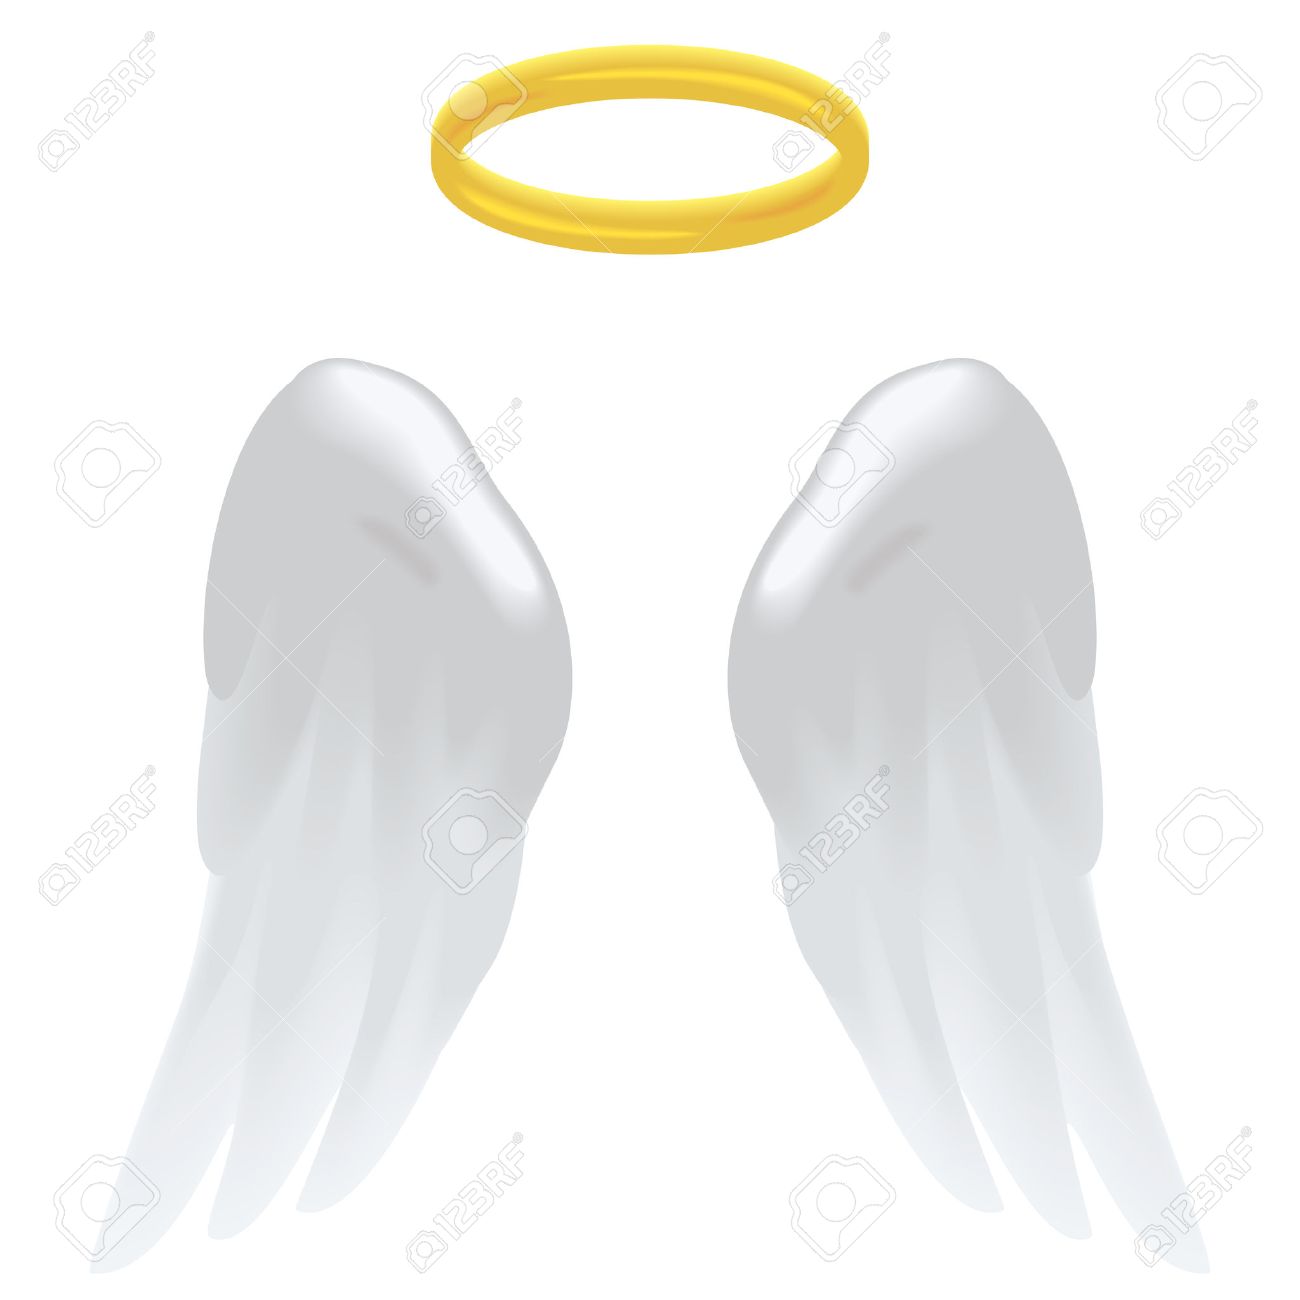 11896 Angel free clipart.